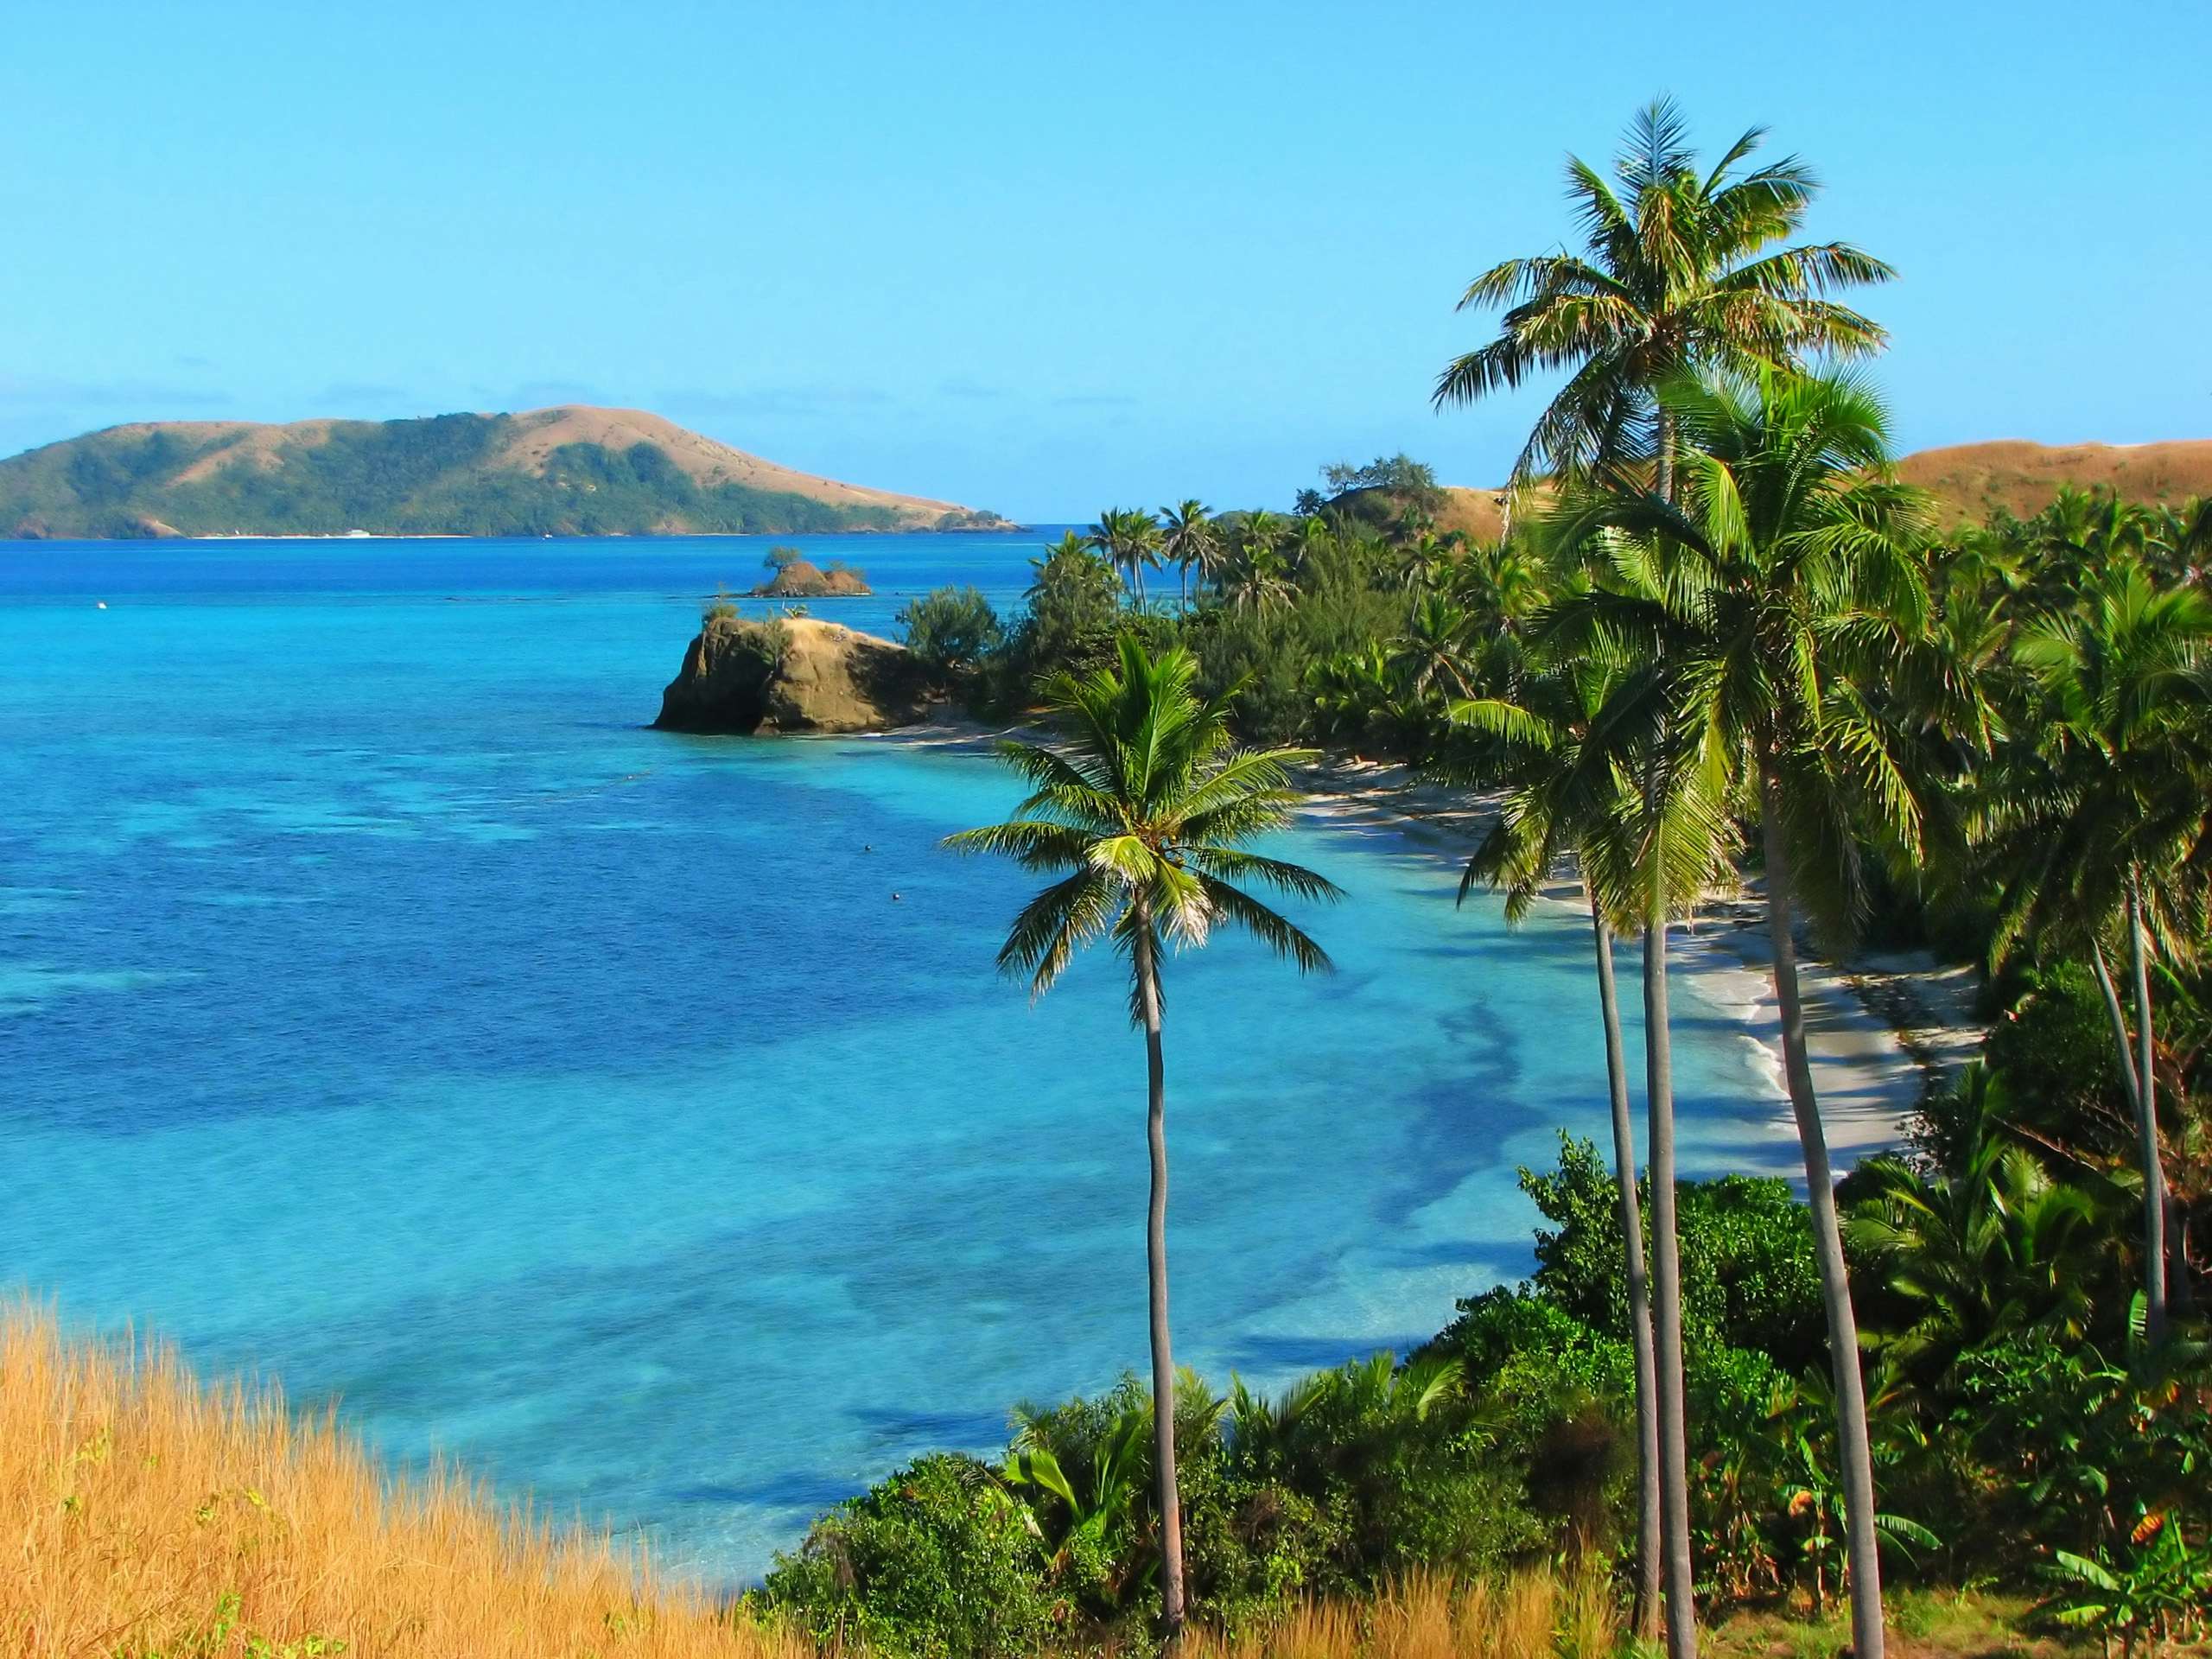 Tropical coastline with palm trees overlooking the clear blue waters of Fiji.